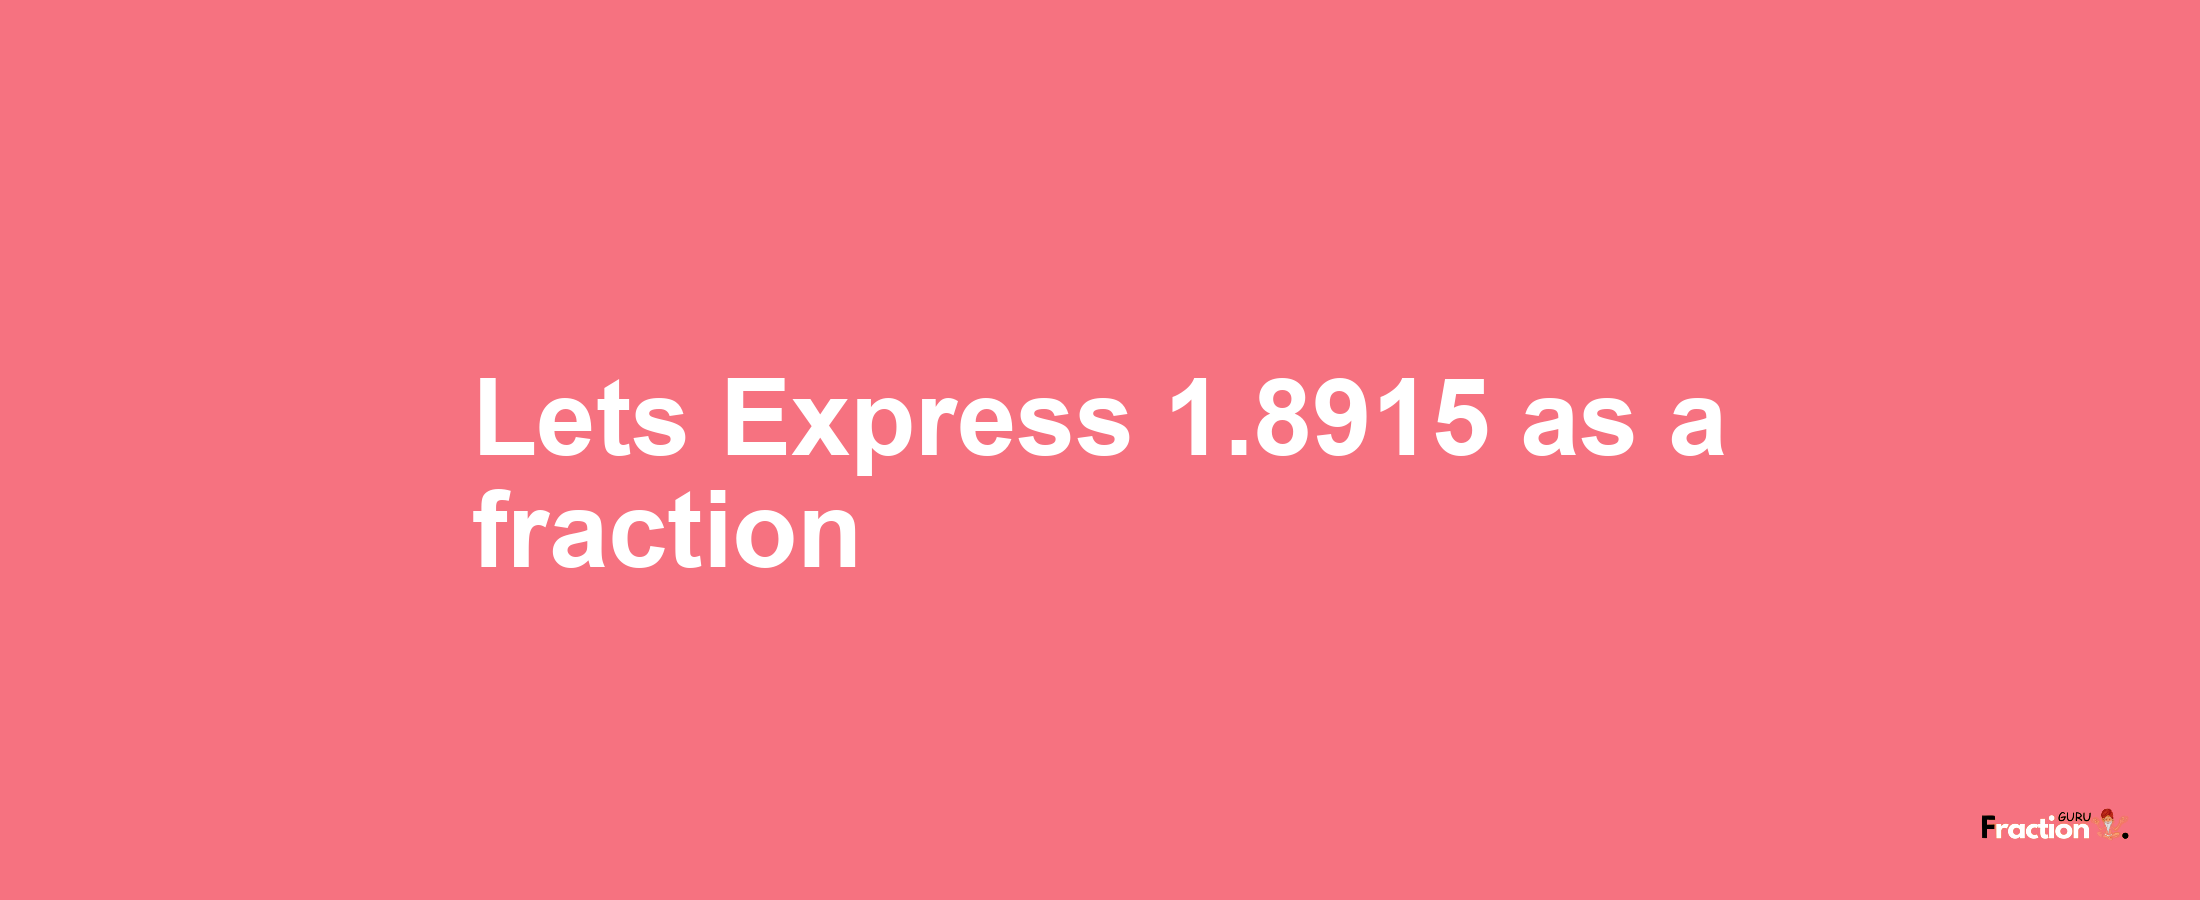 Lets Express 1.8915 as afraction